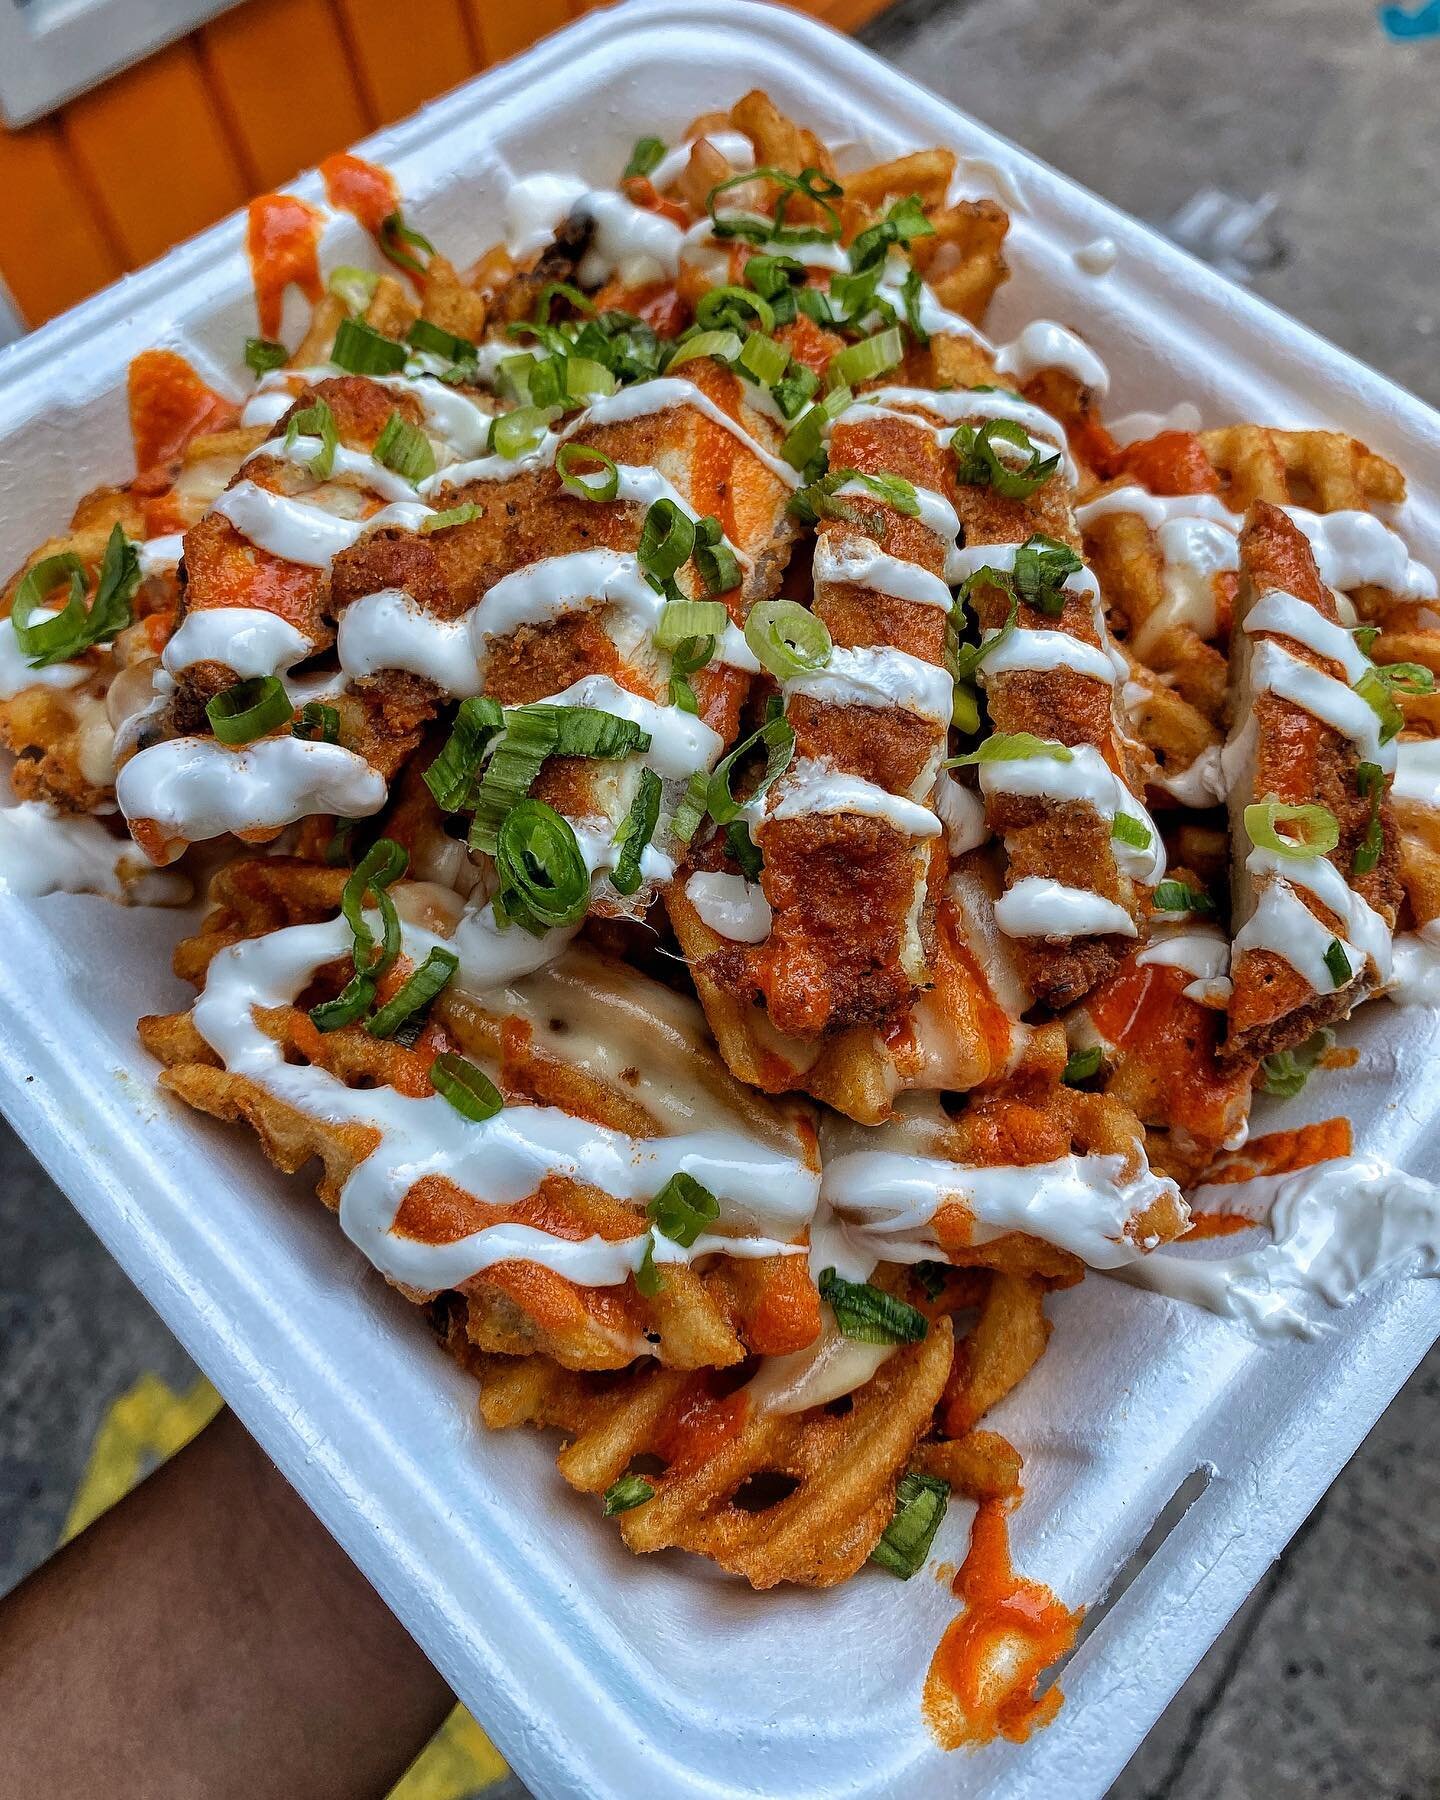 #SUNDAYFUNDAY at its finest. AND NOW WE OFFER DELIVERY!! 👌 BAKER&rsquo;S FRIES - seasoned waffle fries topped with fried chicken, STEEZ sauce, hot sauce, sour cream &amp; scallions. #ATTHEWALLACE #LINKINBIO